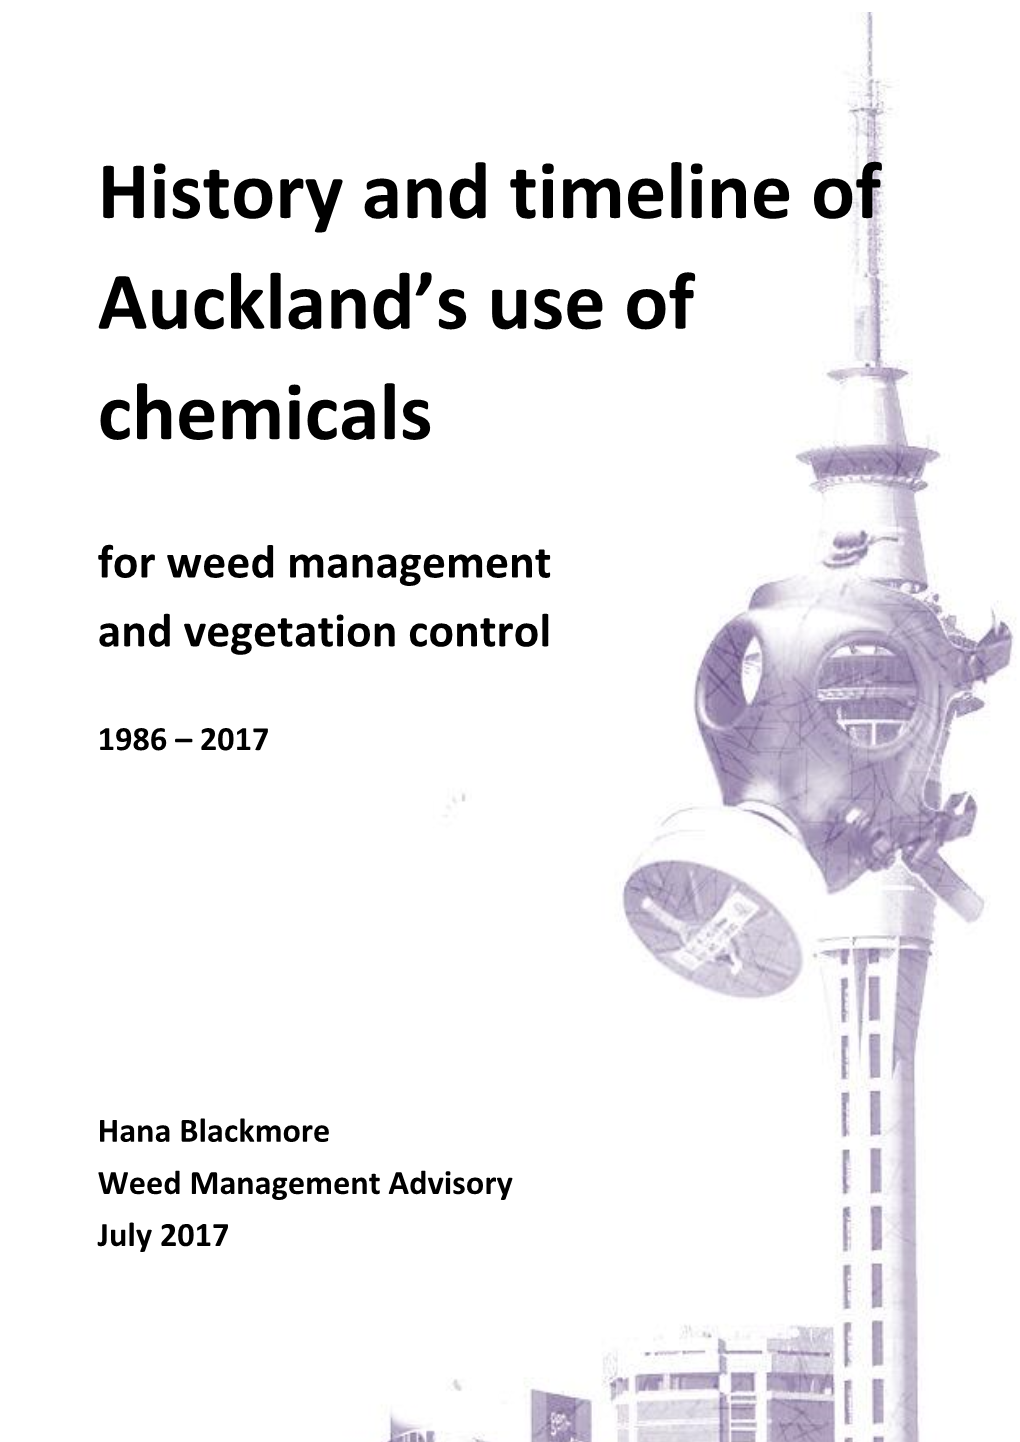 History and Timeline of Auckland's Use of Chemicals